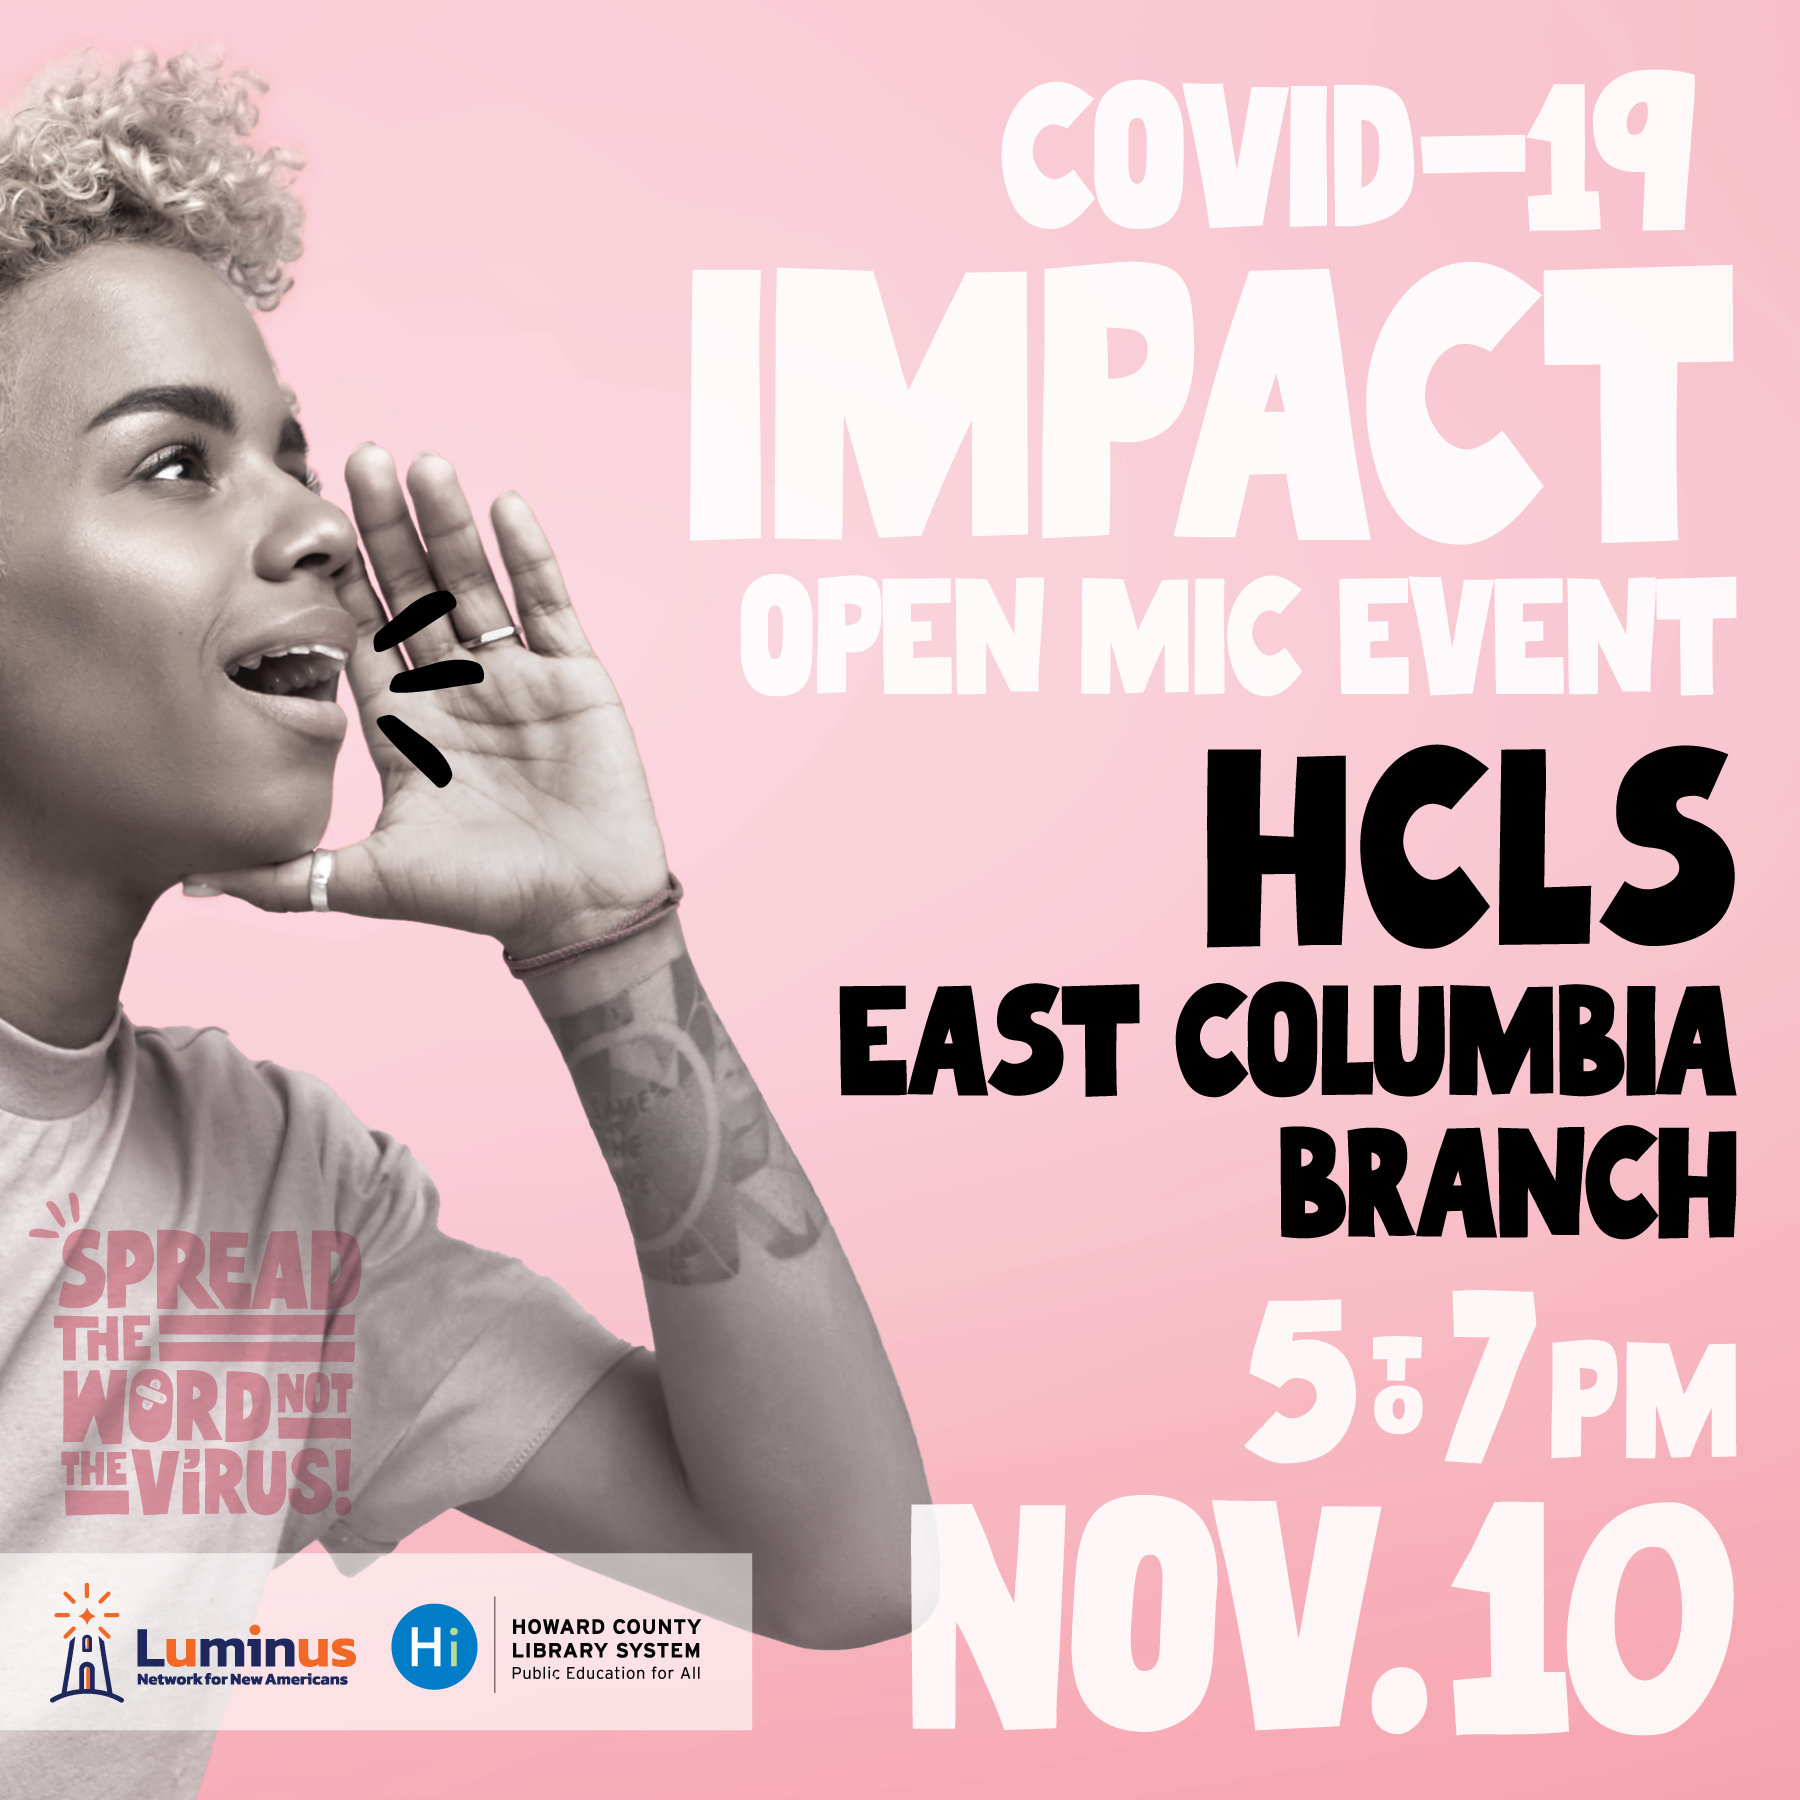 Covid-19 impact open mic event, hcls east columbia branch, 5 to 7 pm, nov 10